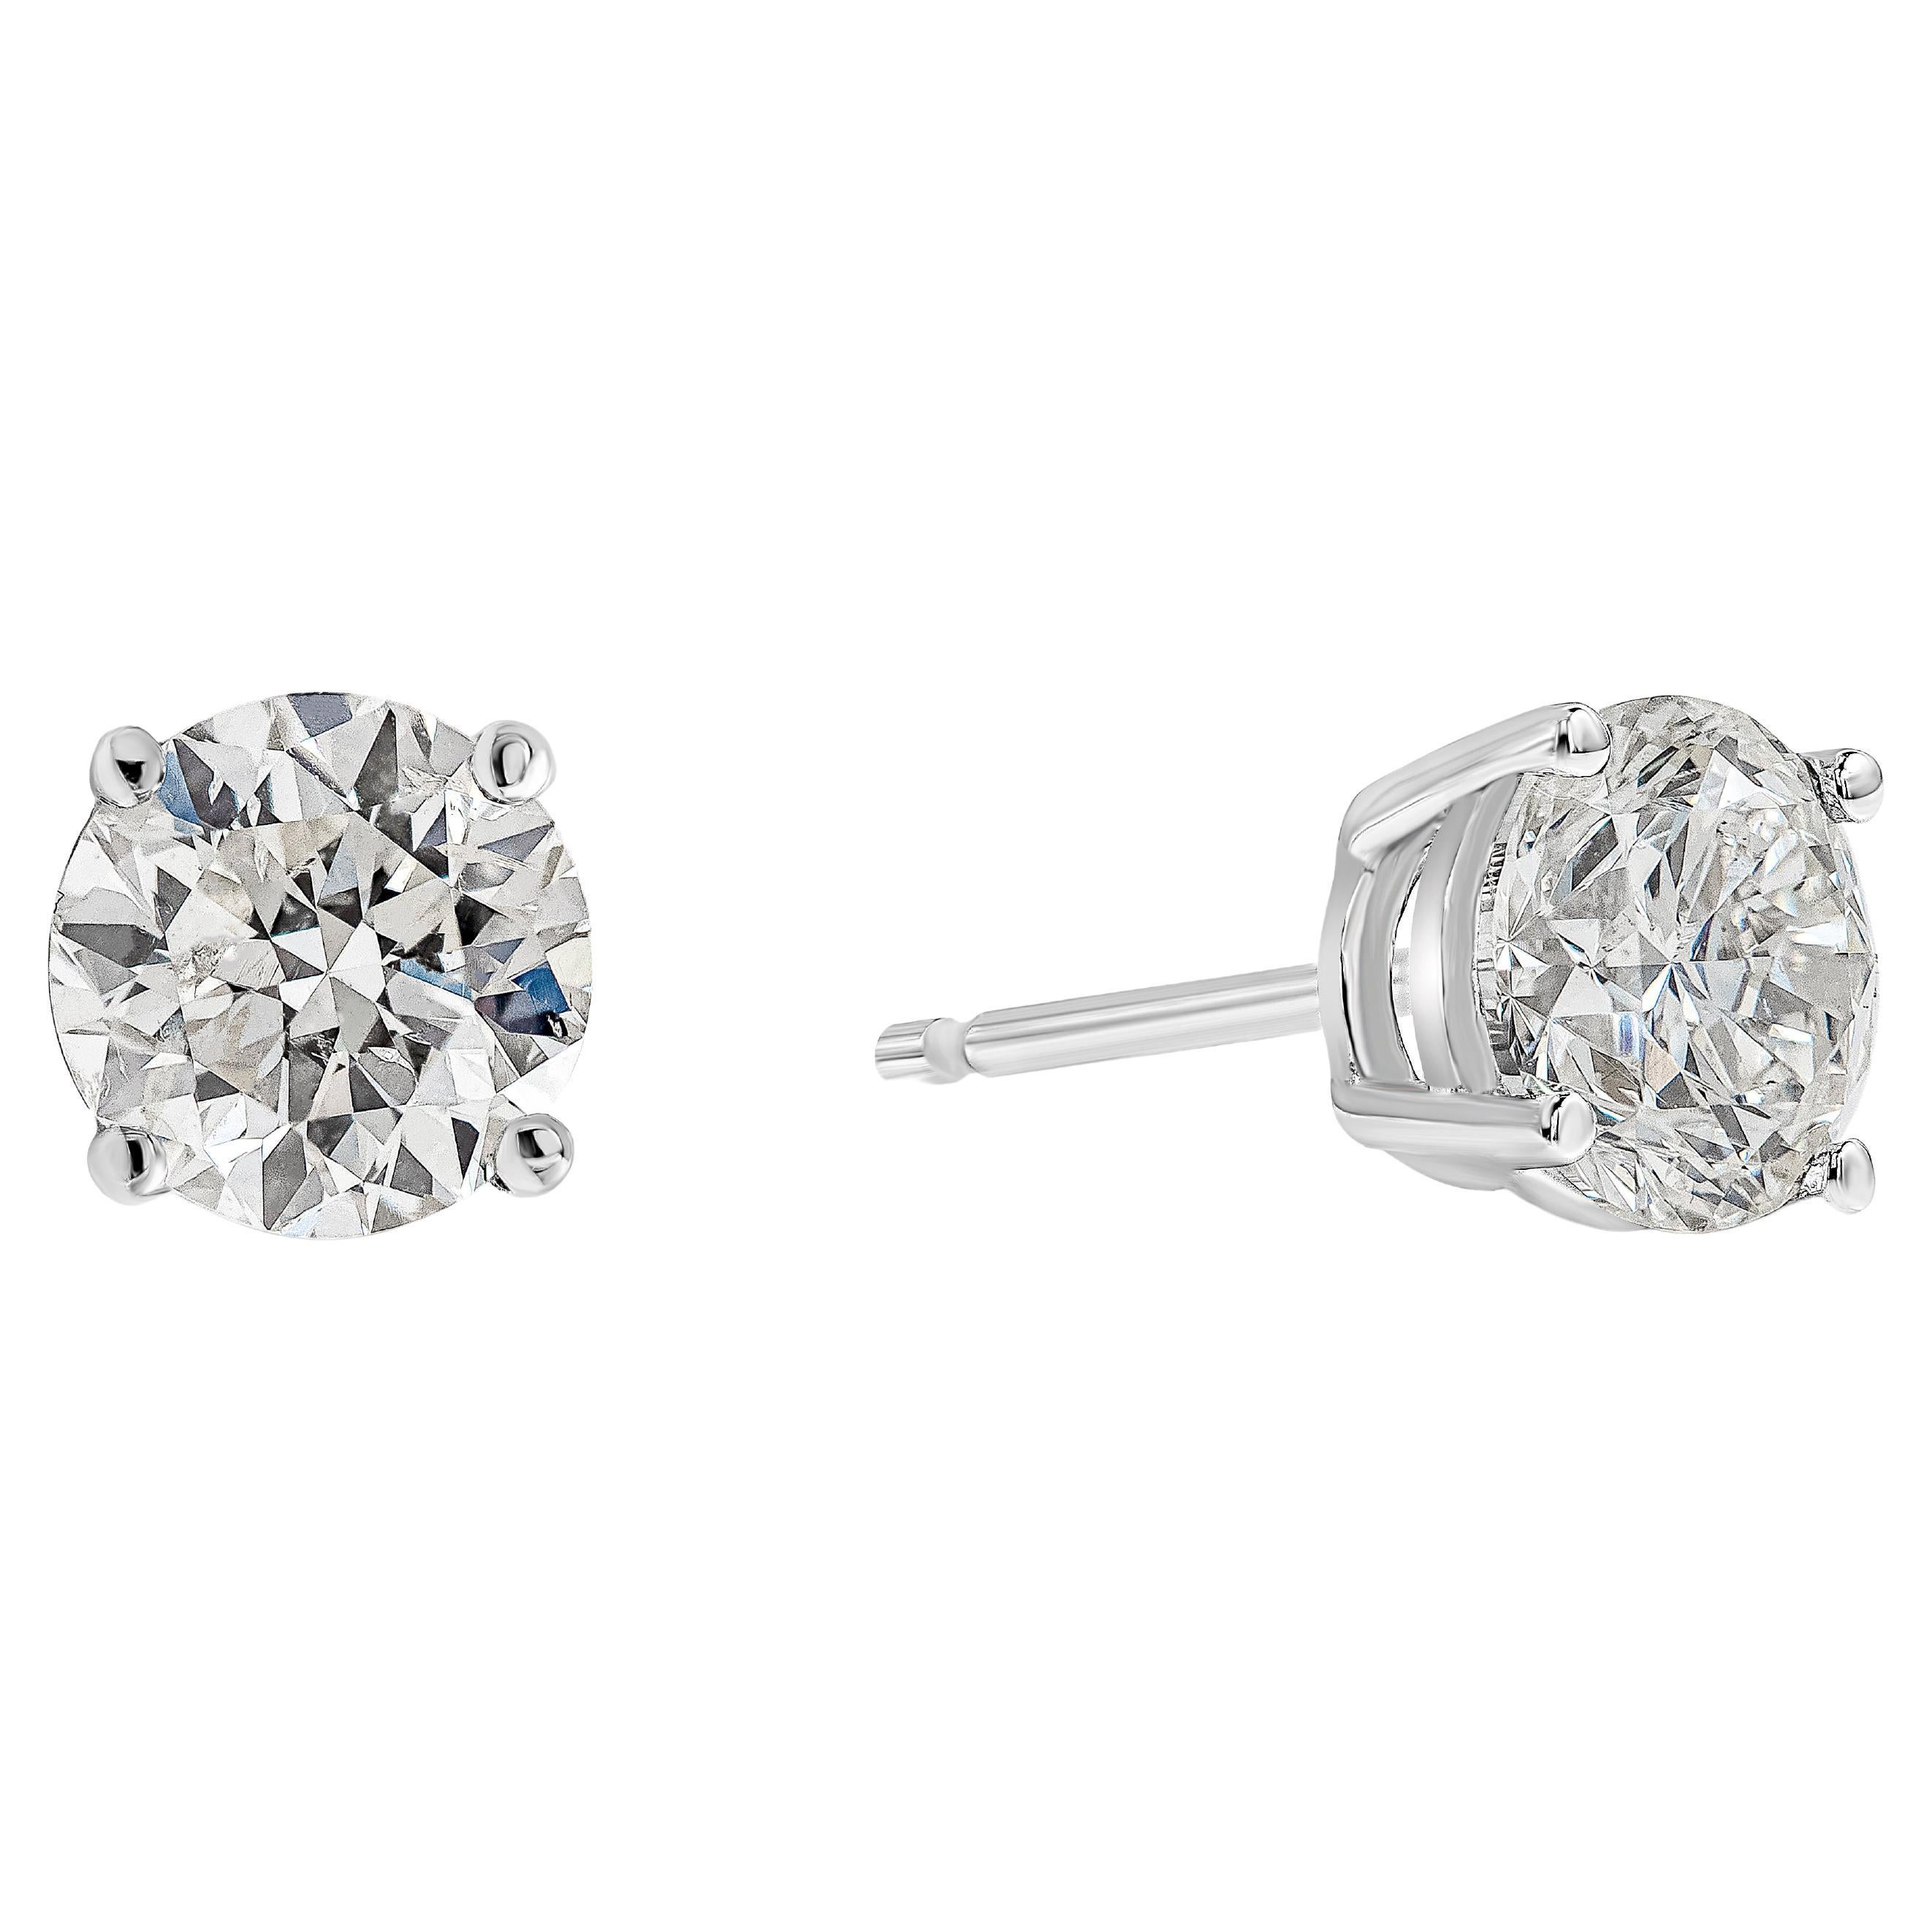 Showcasing a pair of round brilliant diamonds weighing 1.62 carats total, G color, SI3 in clarity. Set in an four prong basket setting and finely made in 18k white gold.

Style available in different price ranges. Prices are based on your selection.